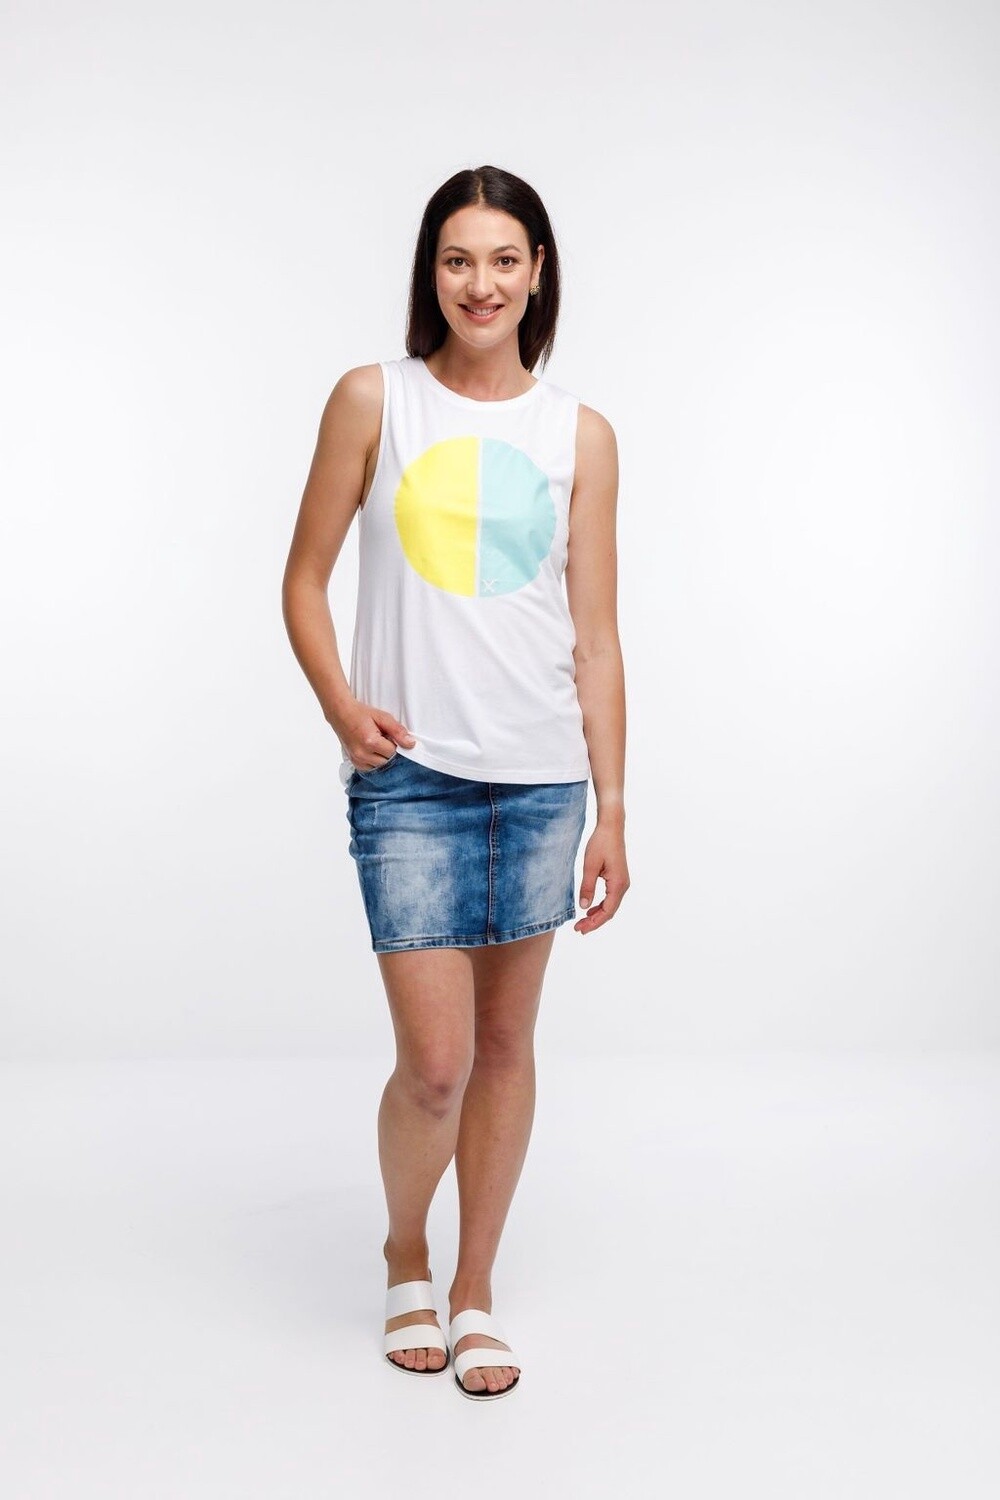 Home-lee Taylor singlet - White with Yellow/Blue cut circle print